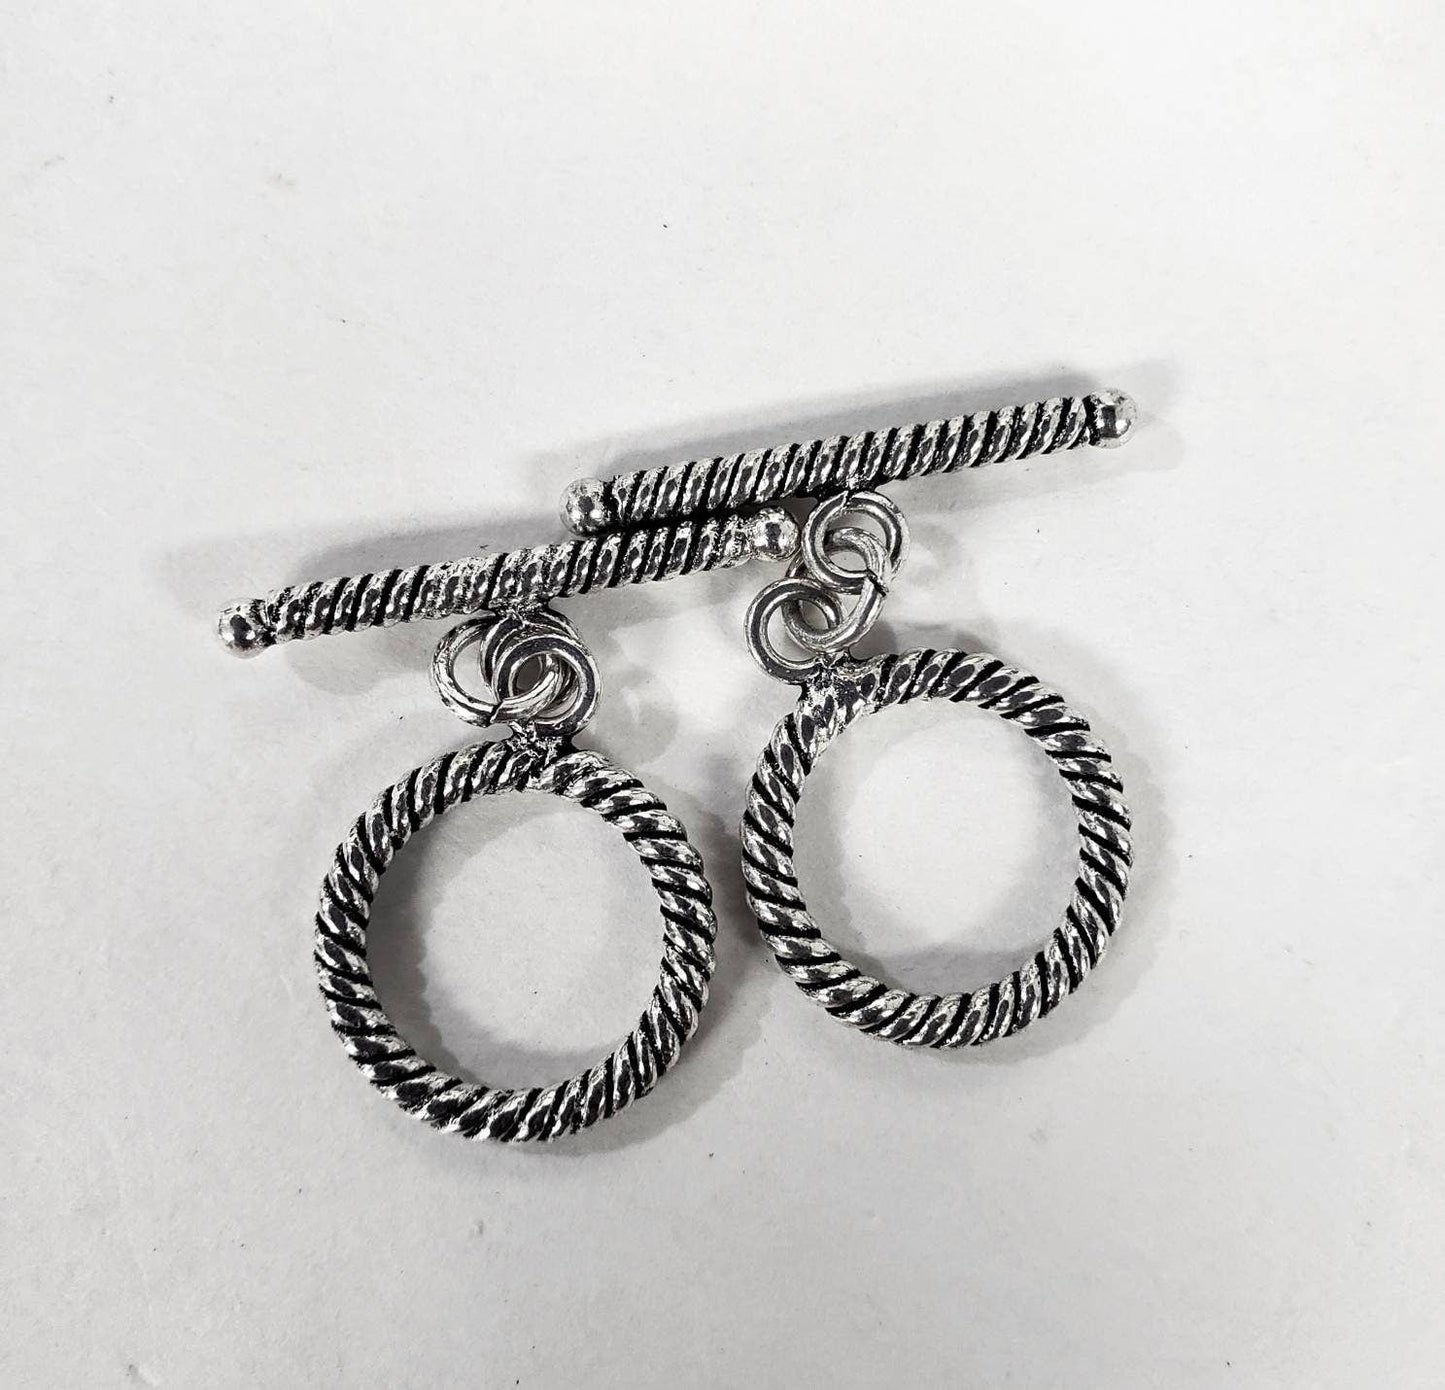 2 sets 925 Sterling Silver Bali 14mm Rope toggle clasp, vintage Handmade jewelry making toggle Clasp